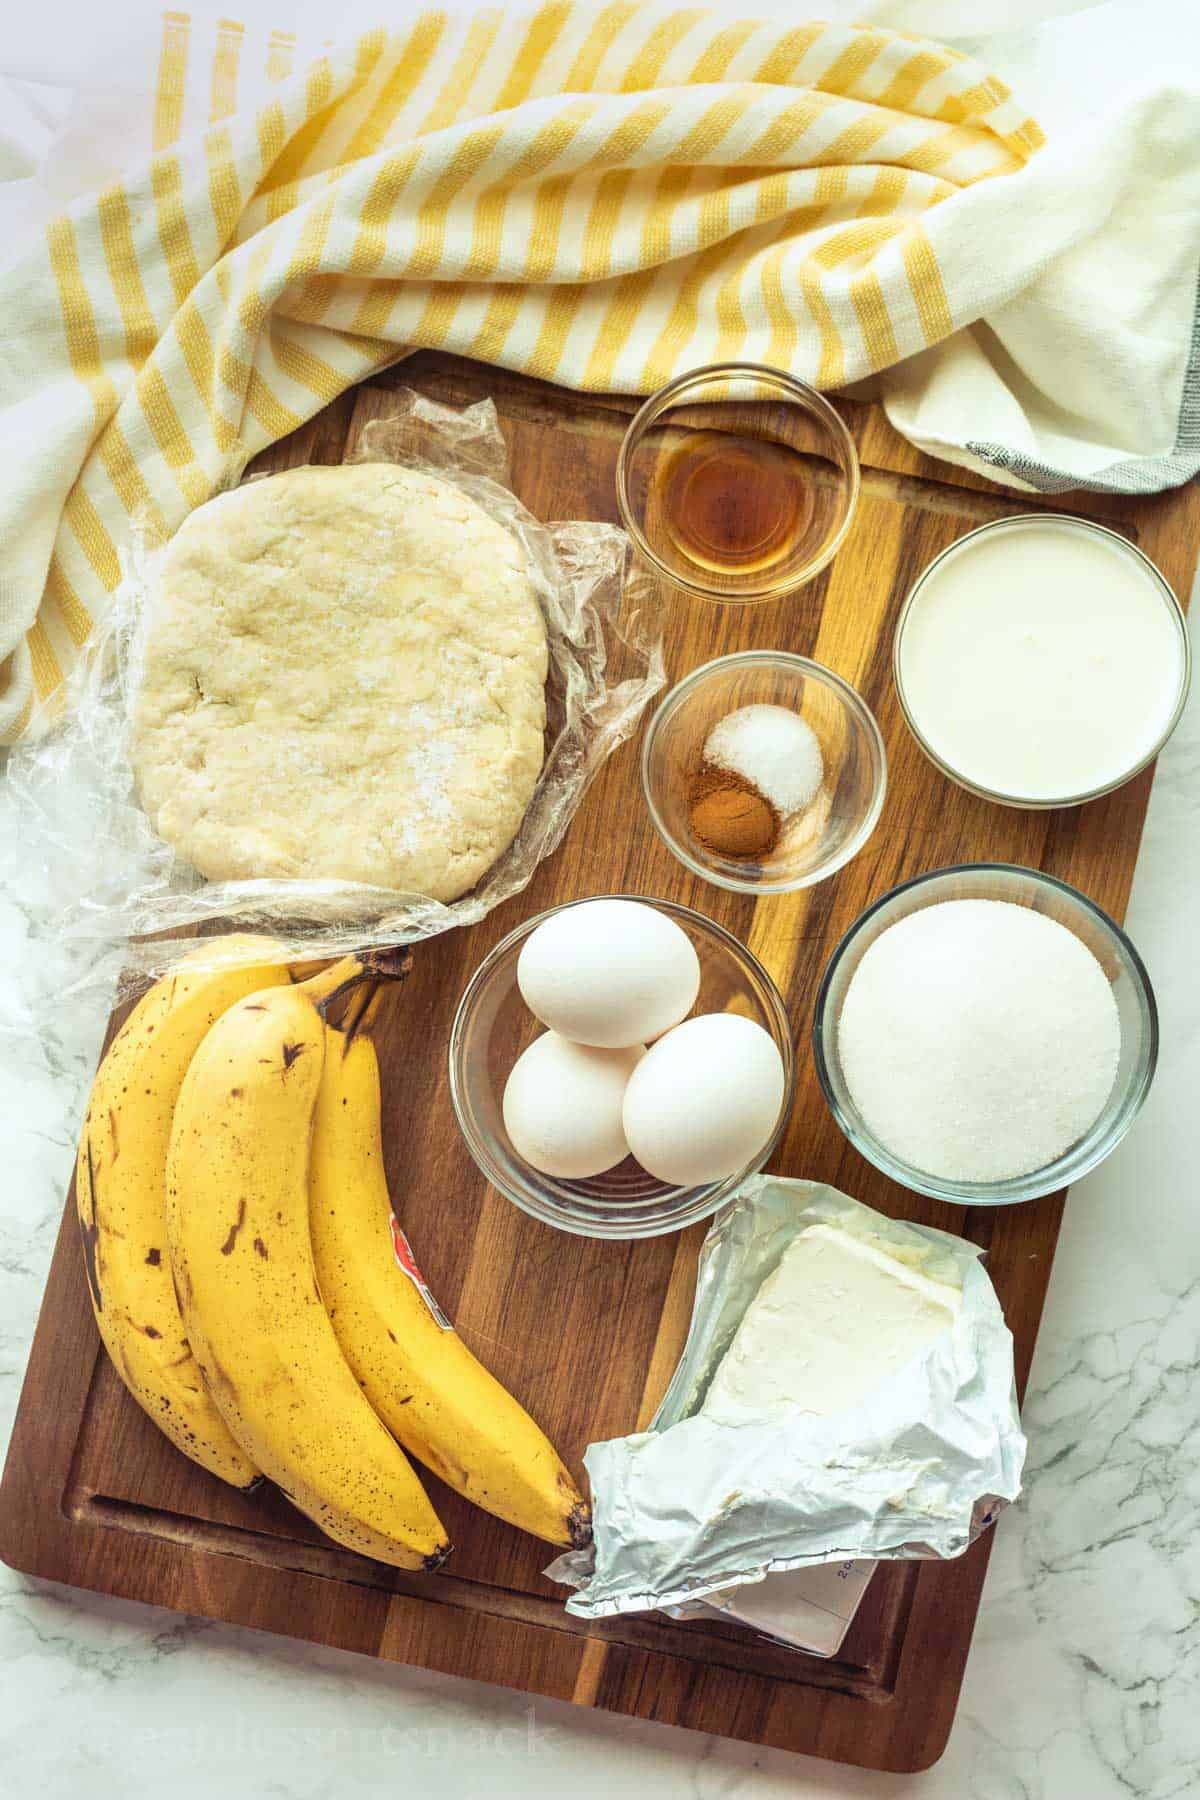 Ingredients for baked banana pie in glass bowls on wood cutting board with yellow striped dish towel.